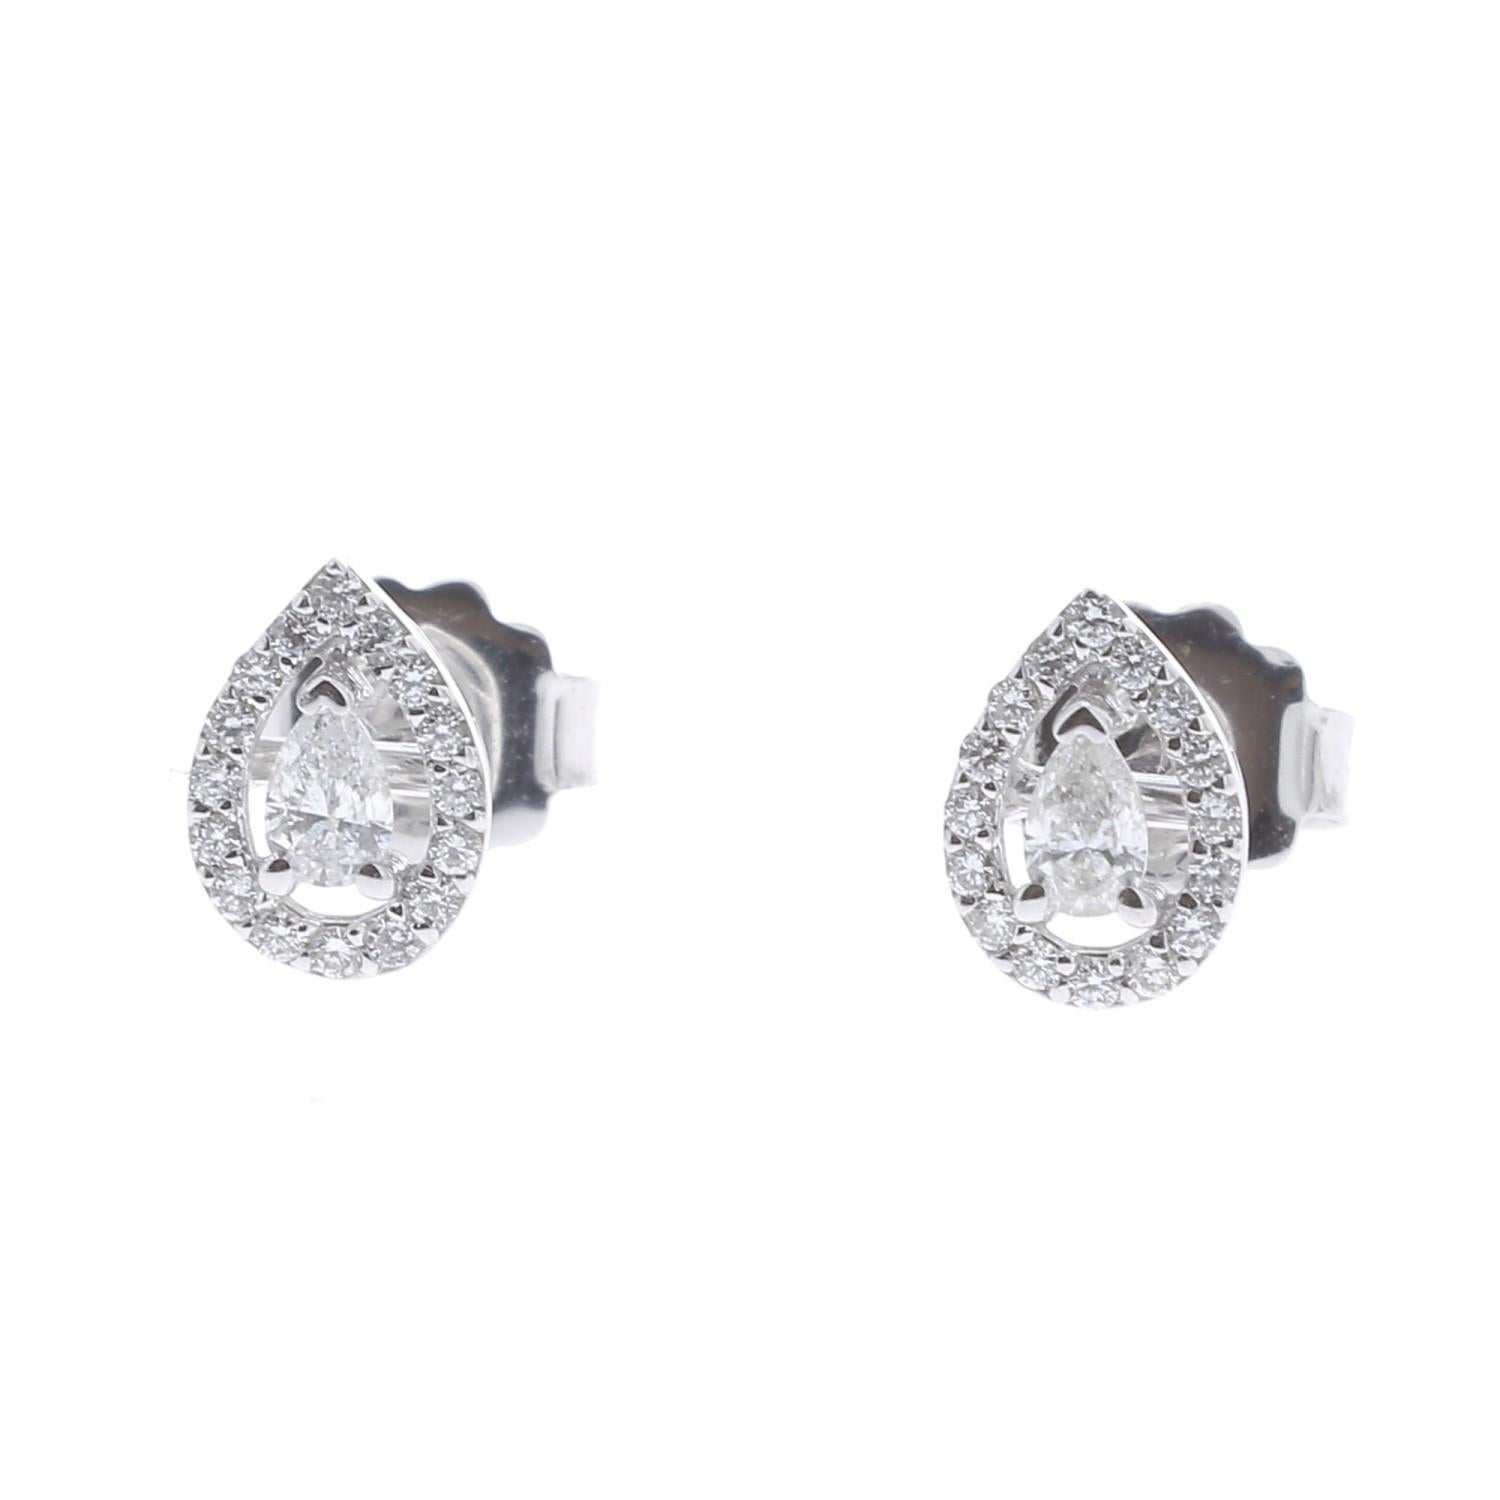 Pear-Shape Diamonds Earrings set with a halo of Round Diamonds weighing 0.22 
carats, centered on a Marquise Diamond weighing 0.14 carats.
Totally these Earrings weights 0.36 Carats.
The Diamonds are GVS qualities.
The Clip-on Earrigns are 18K White